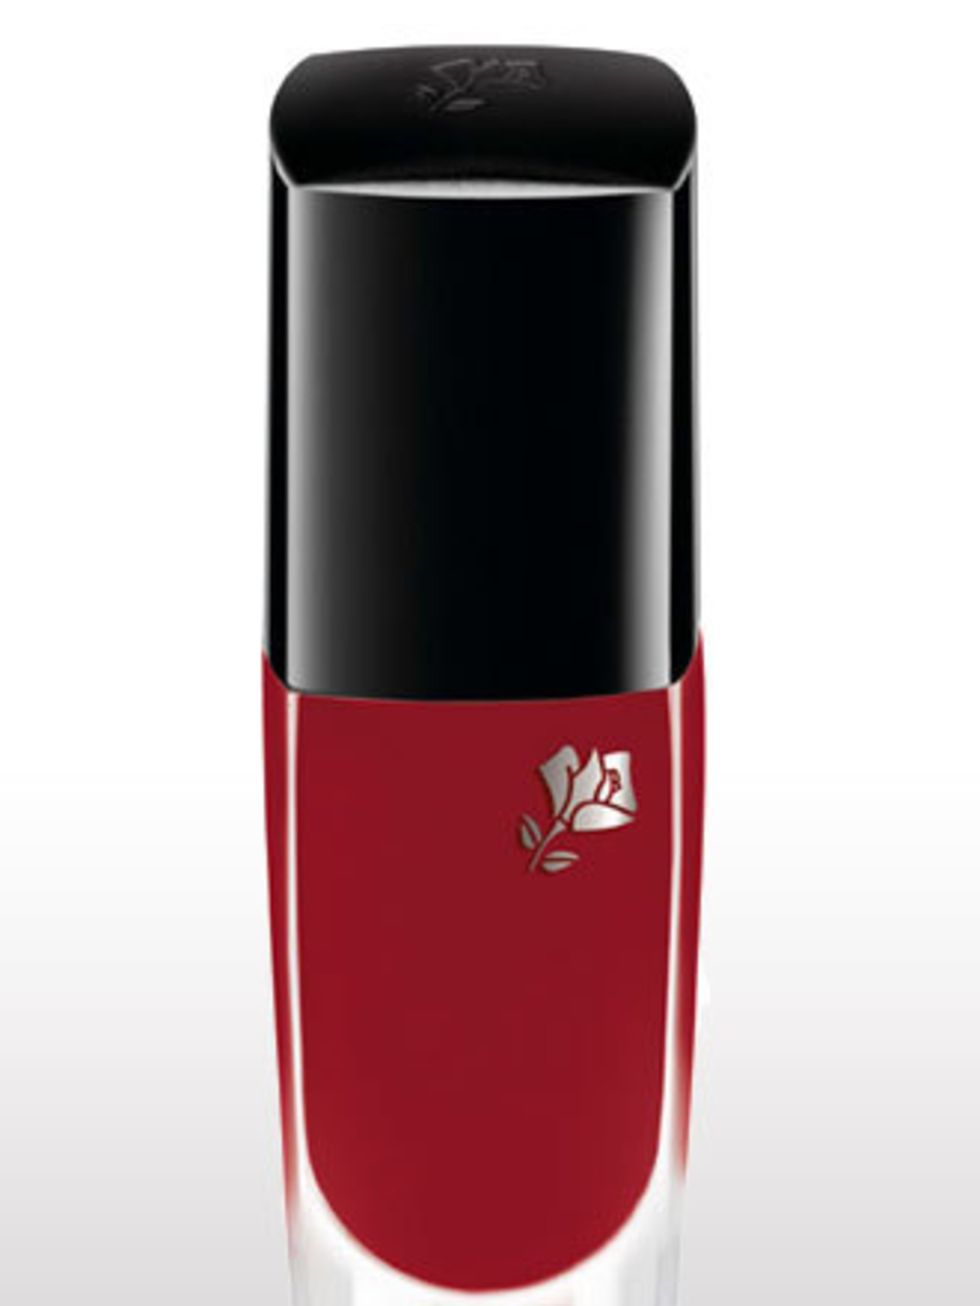 <p><strong>Fire</strong></p><p>Hot, fiery, glimmering shades will light up your nails from autumn through to Christmas</p><p><a href="http://www.lancome.co.uk/_en/_gb/index.aspx">Lancome</a> Le Vernis in 102, £14.80</p>